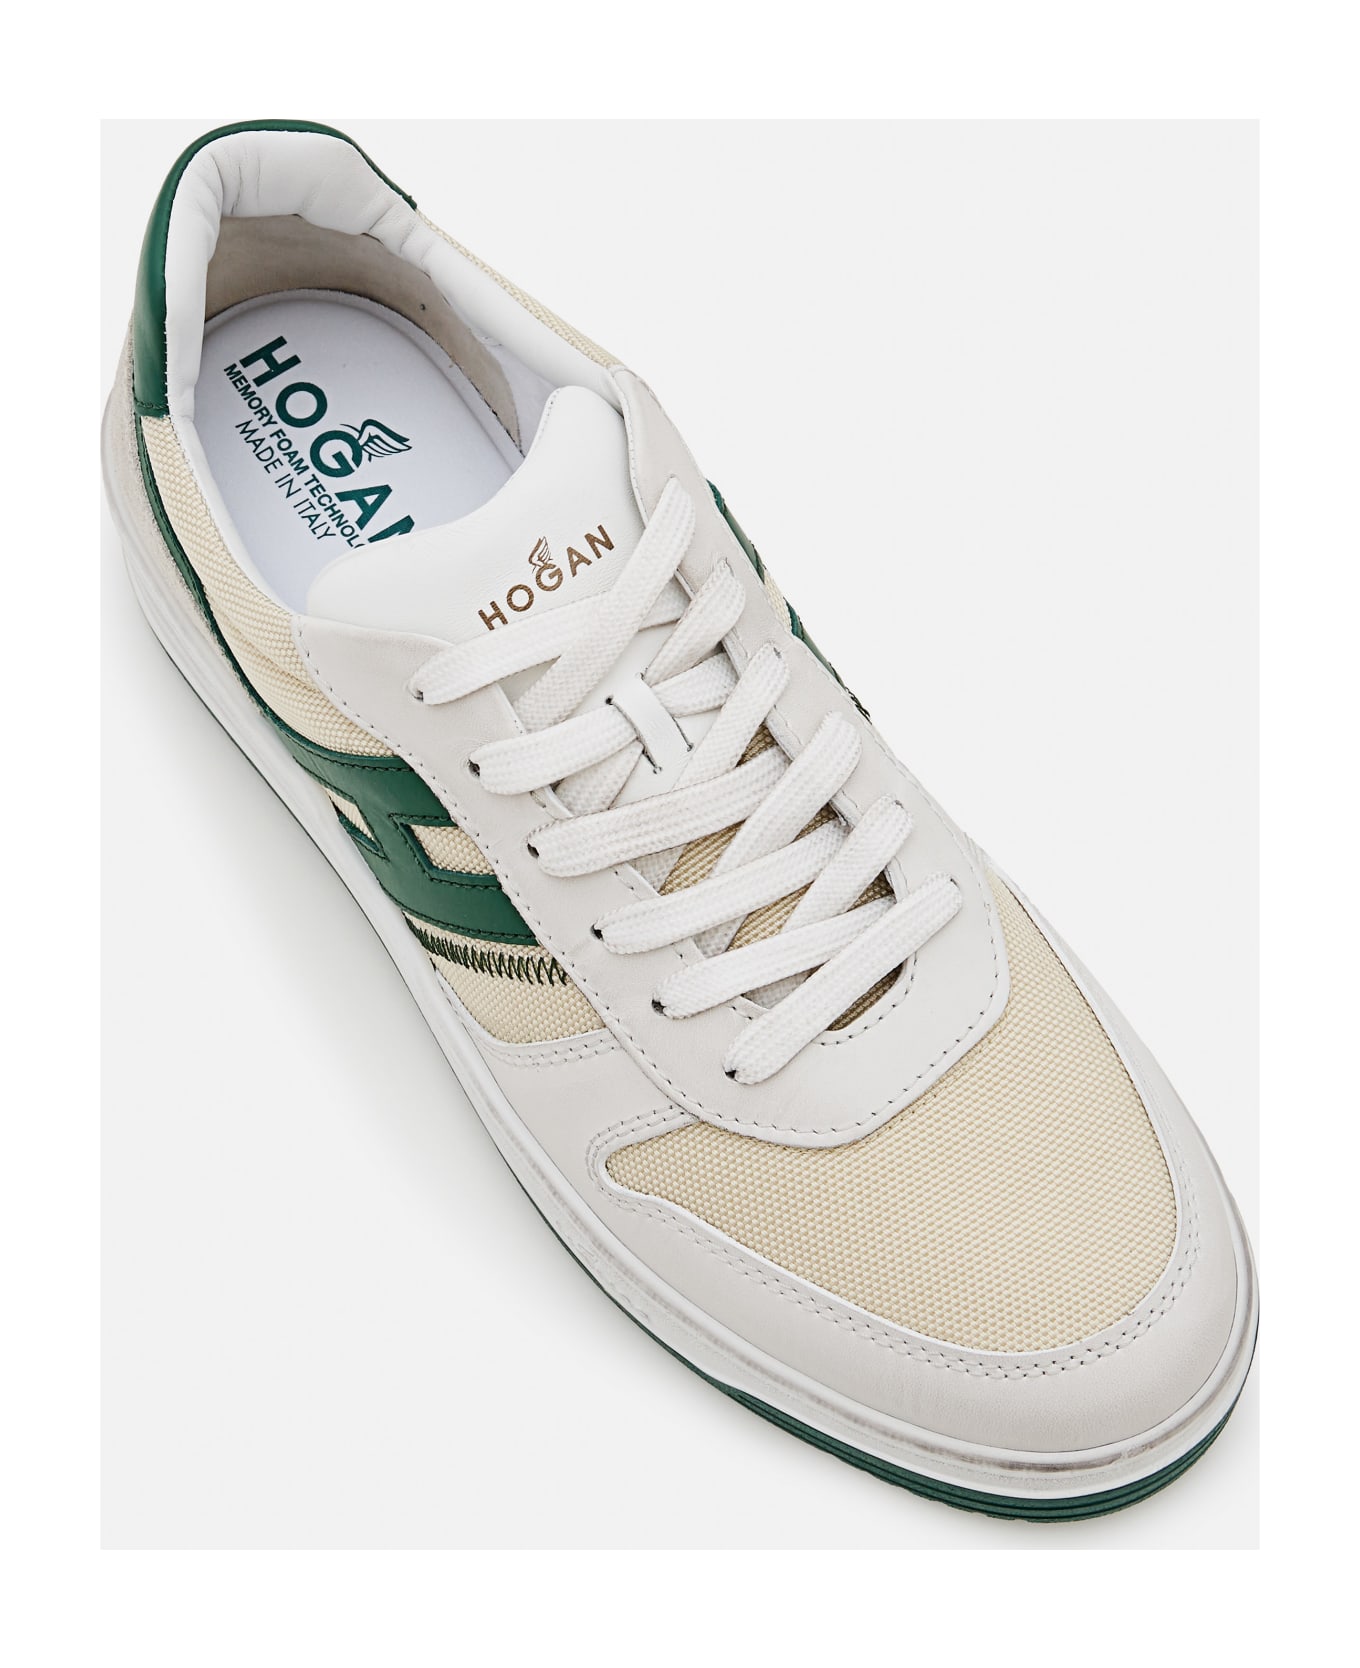 Hogan H630 Laced Tom Sneakers - Ivory